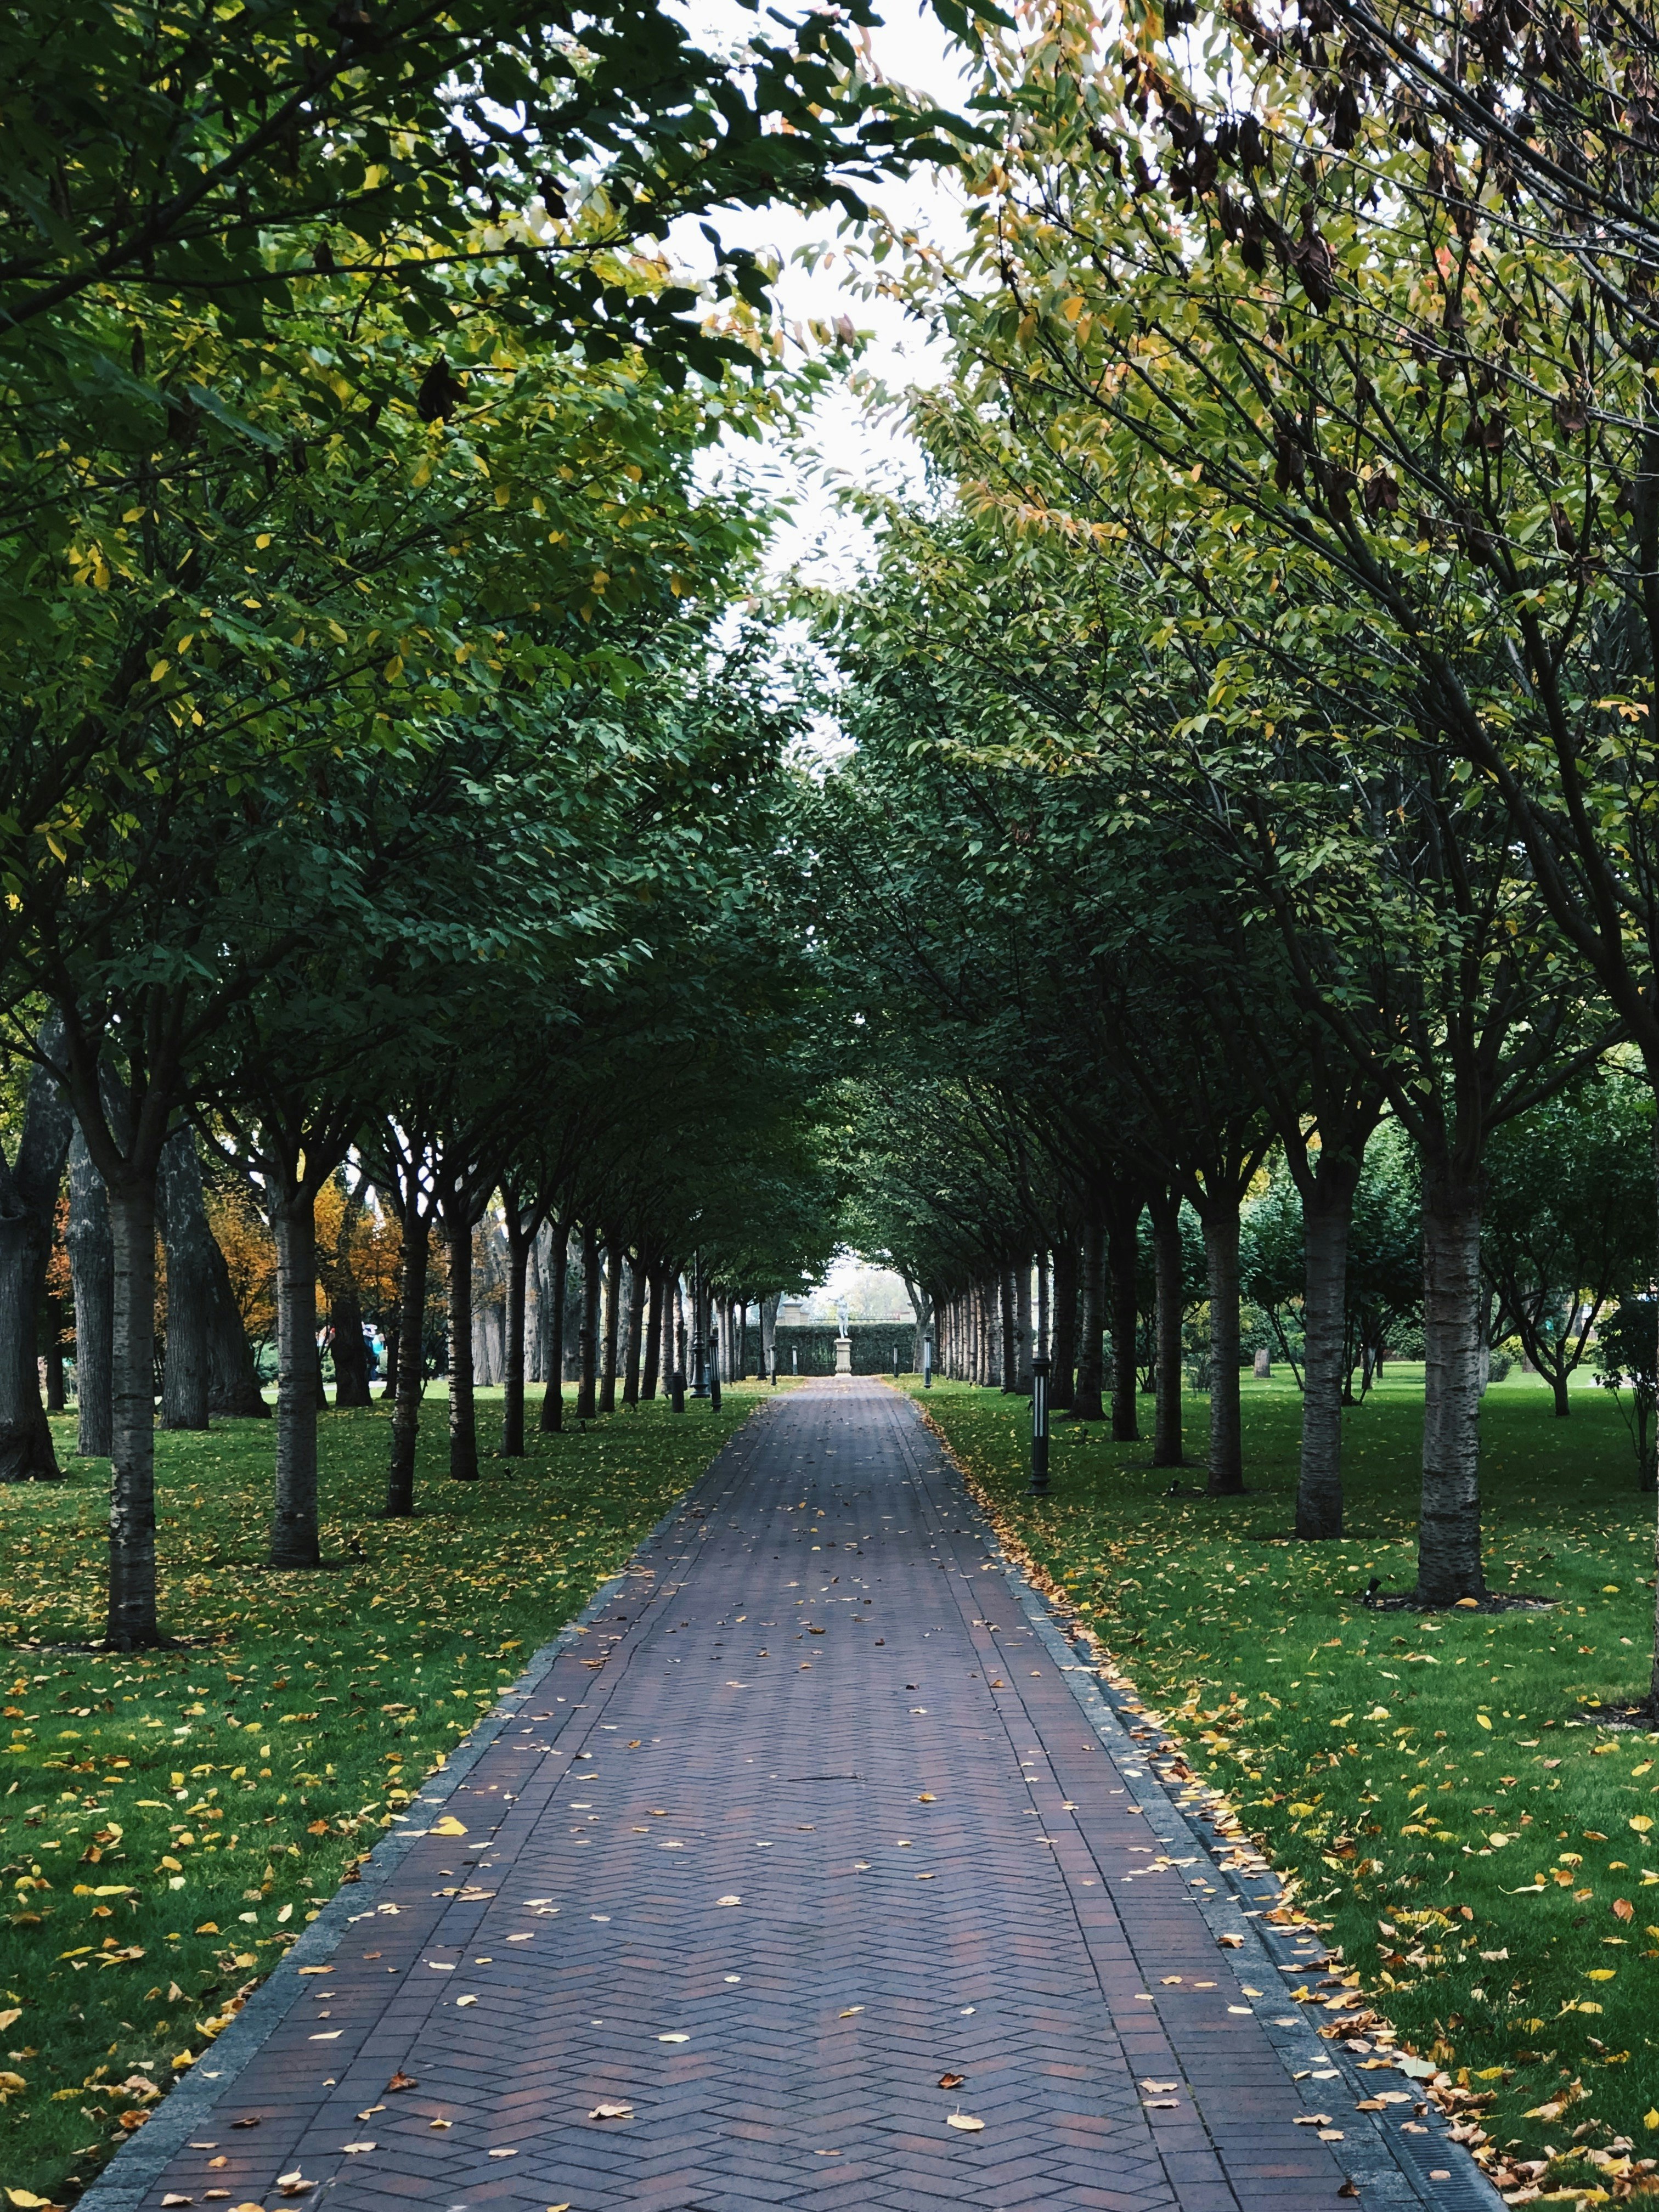 gray concrete pathway between green grass and trees during daytime